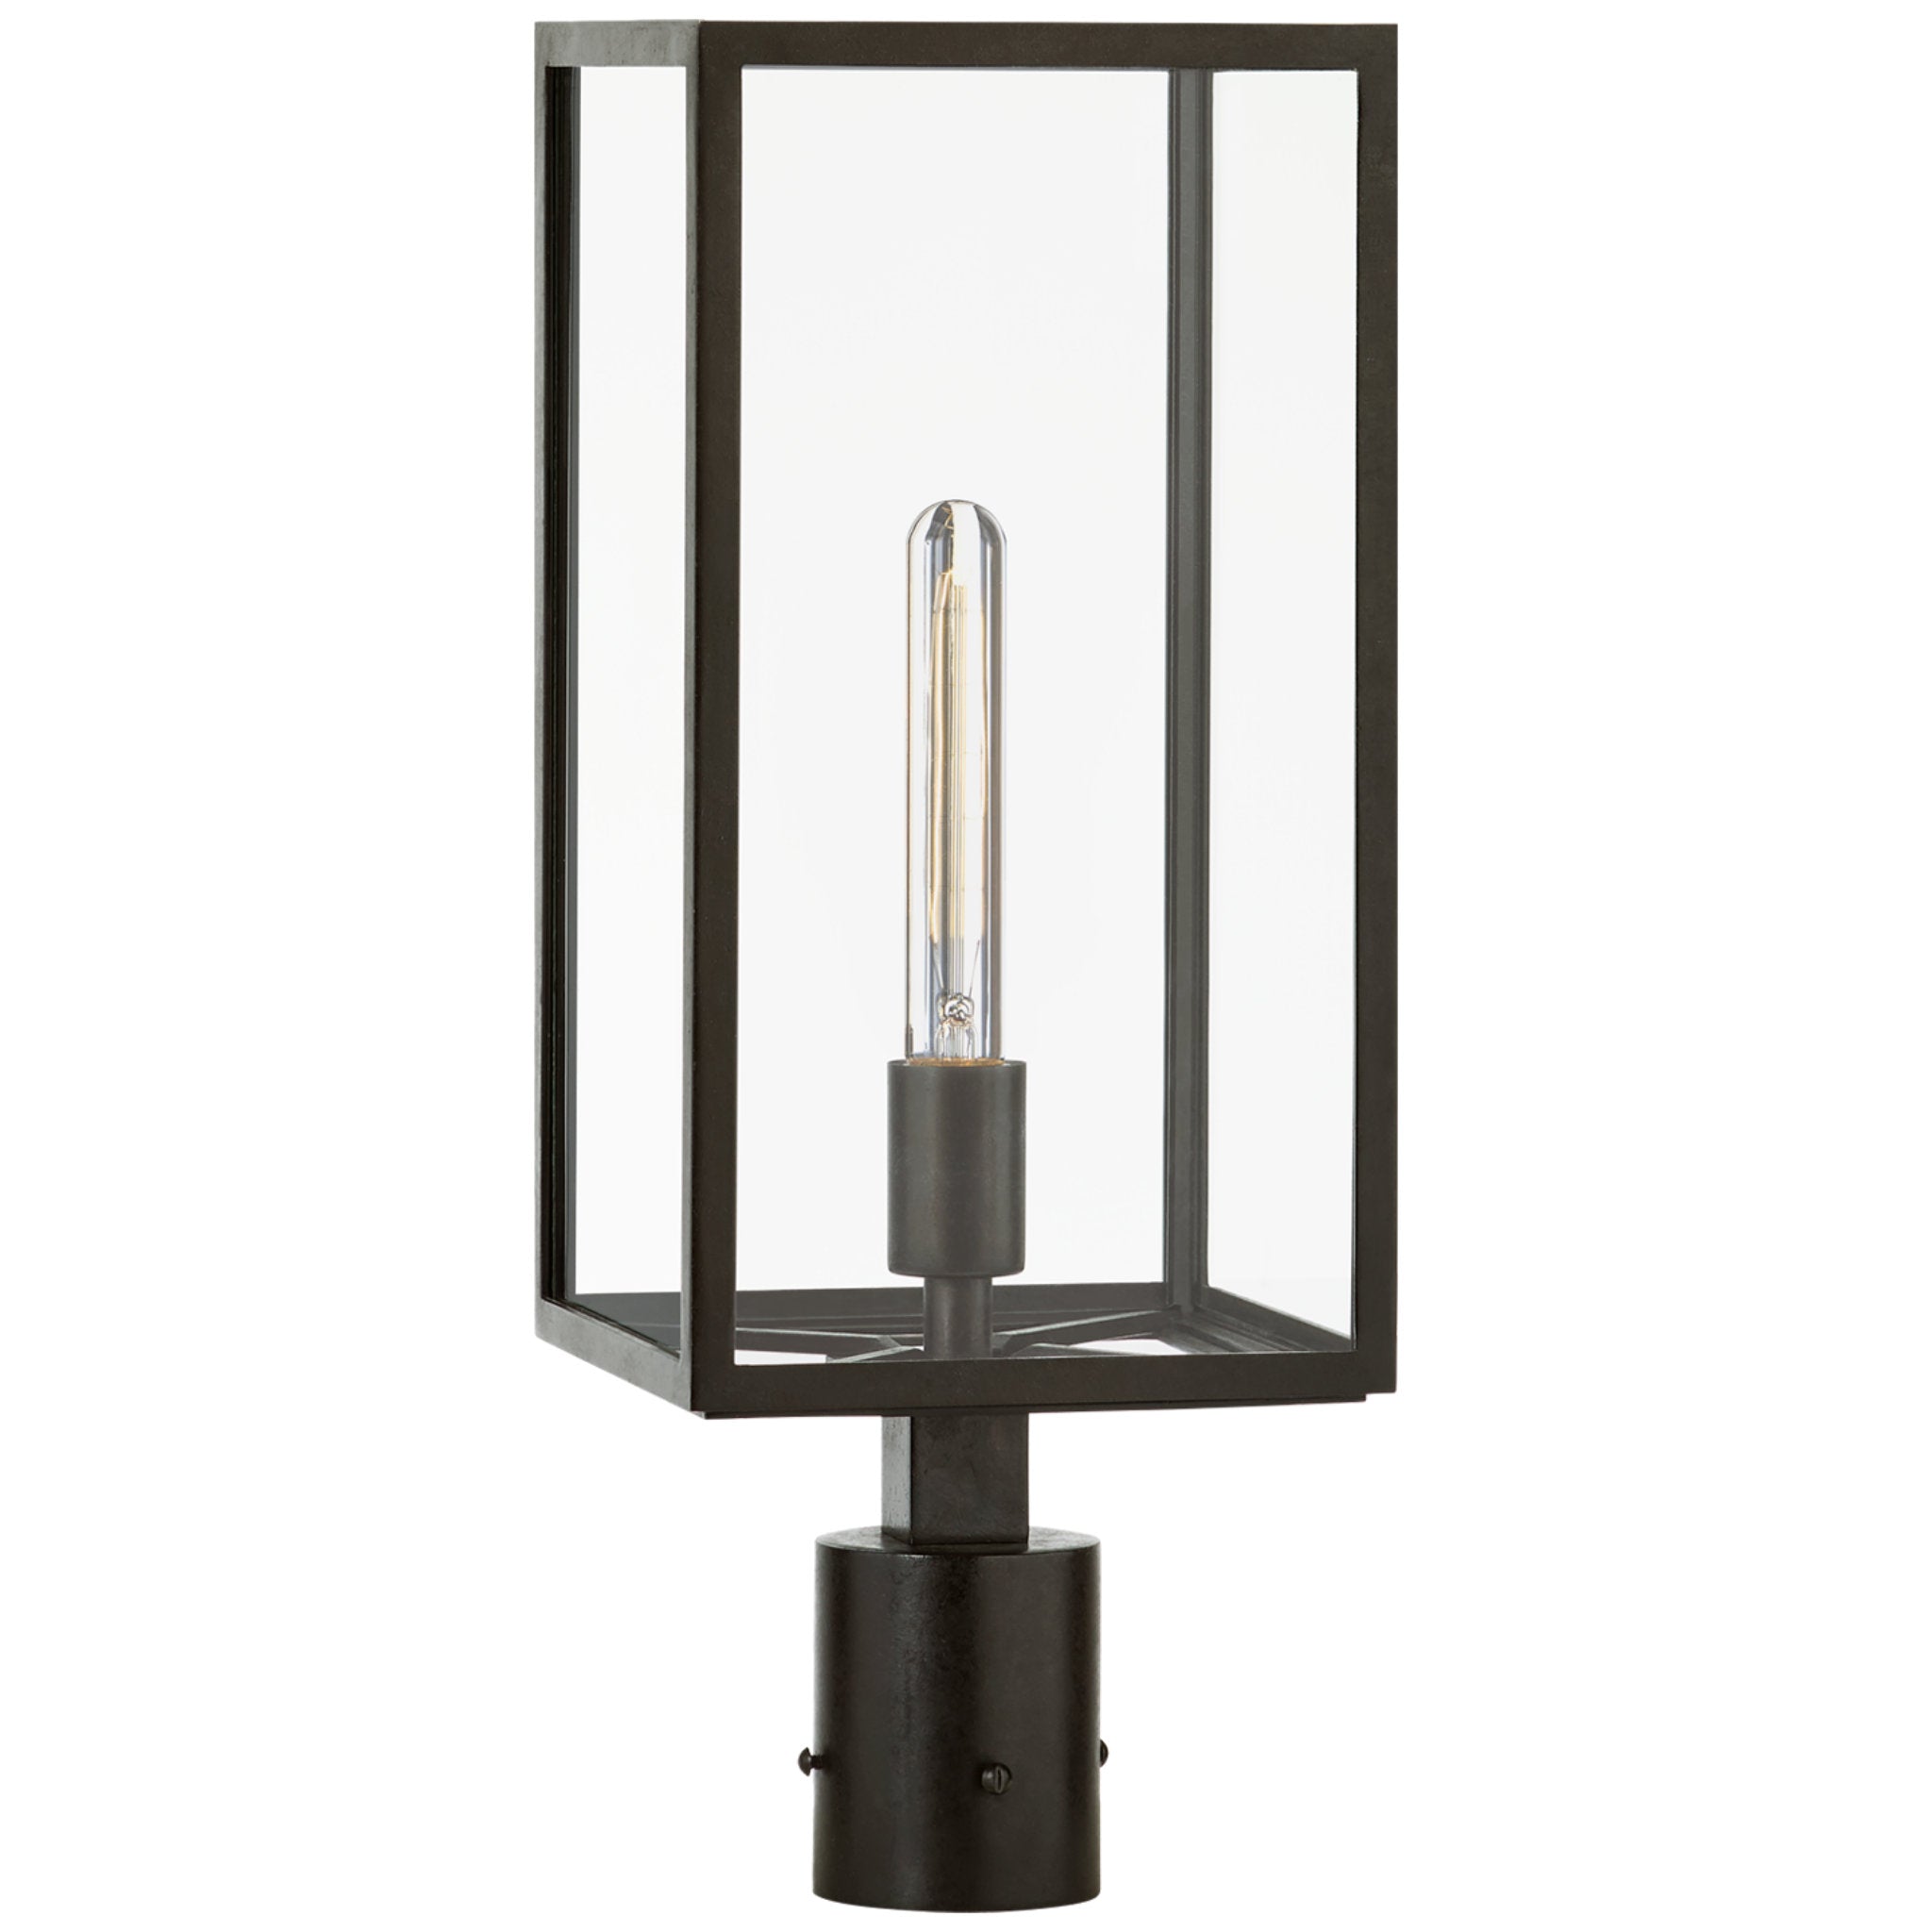 Chapman & Myers Fresno Post Light in Aged Iron with Clear Glass